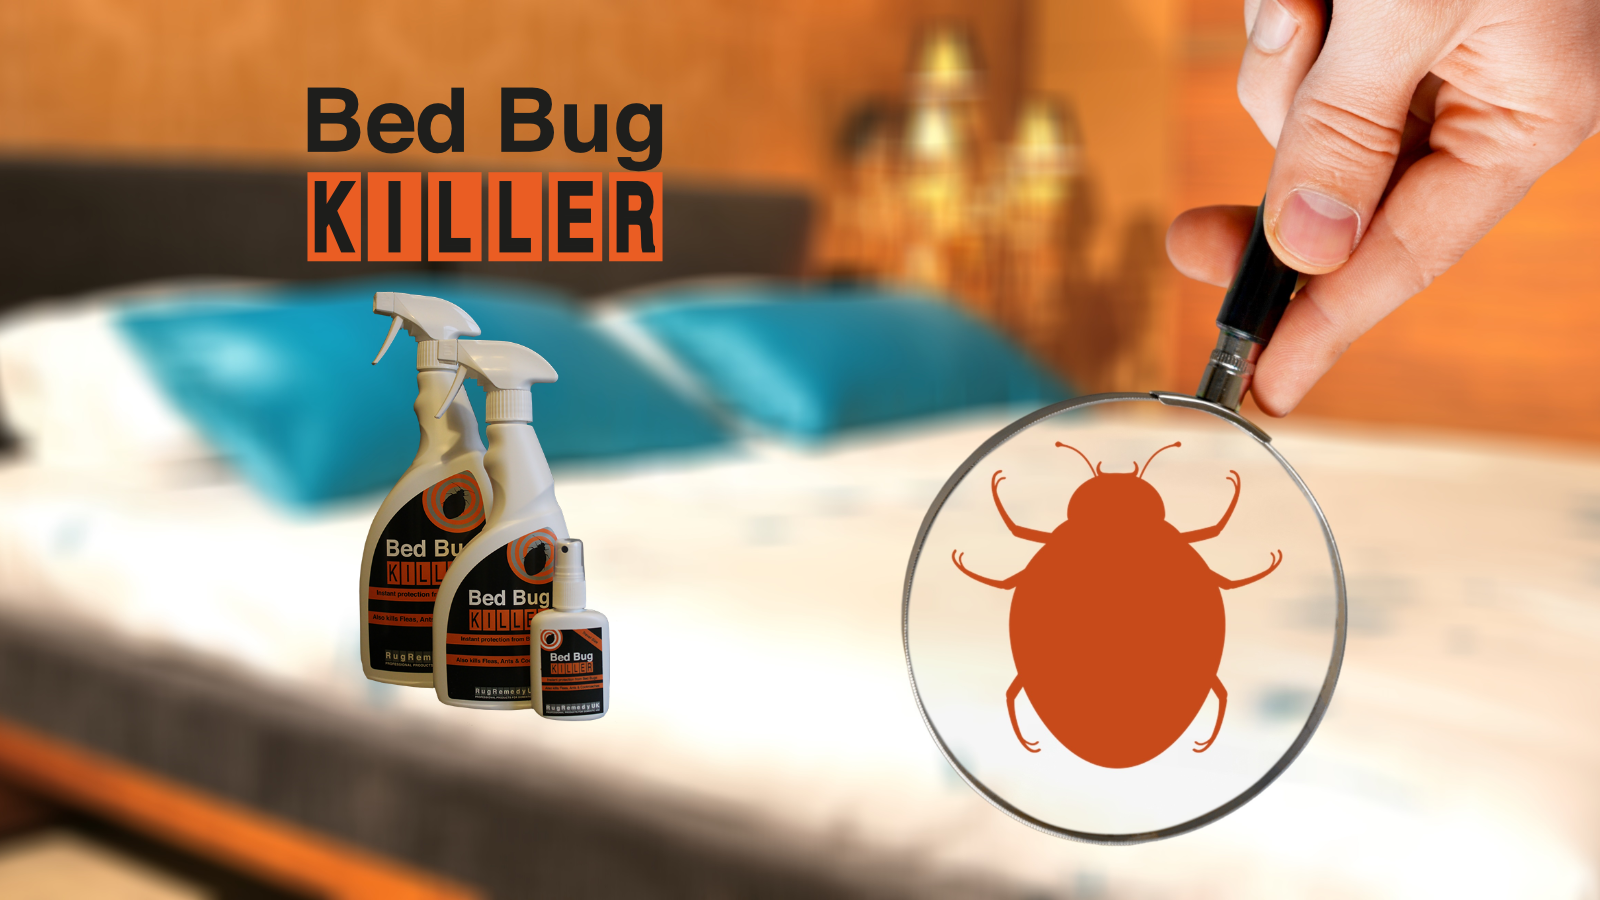 Image of an unmade bed with Bed Bug Killer bottles and the caption 